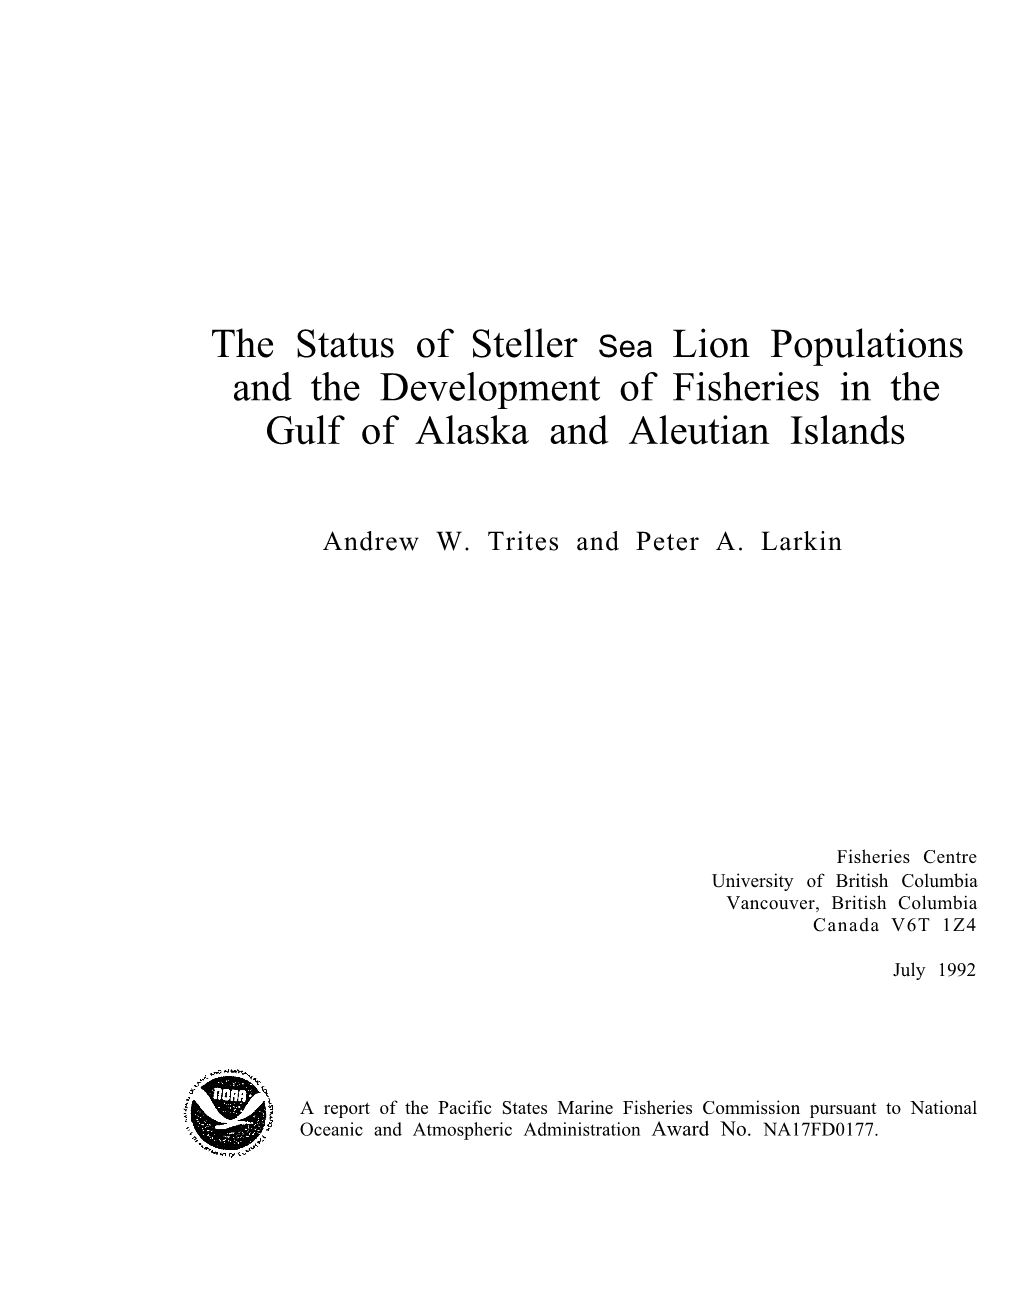 The Status of Steller Sea Lion Populations and the Development of Fisheries in the Gulf of Alaska and Aleutian Islands